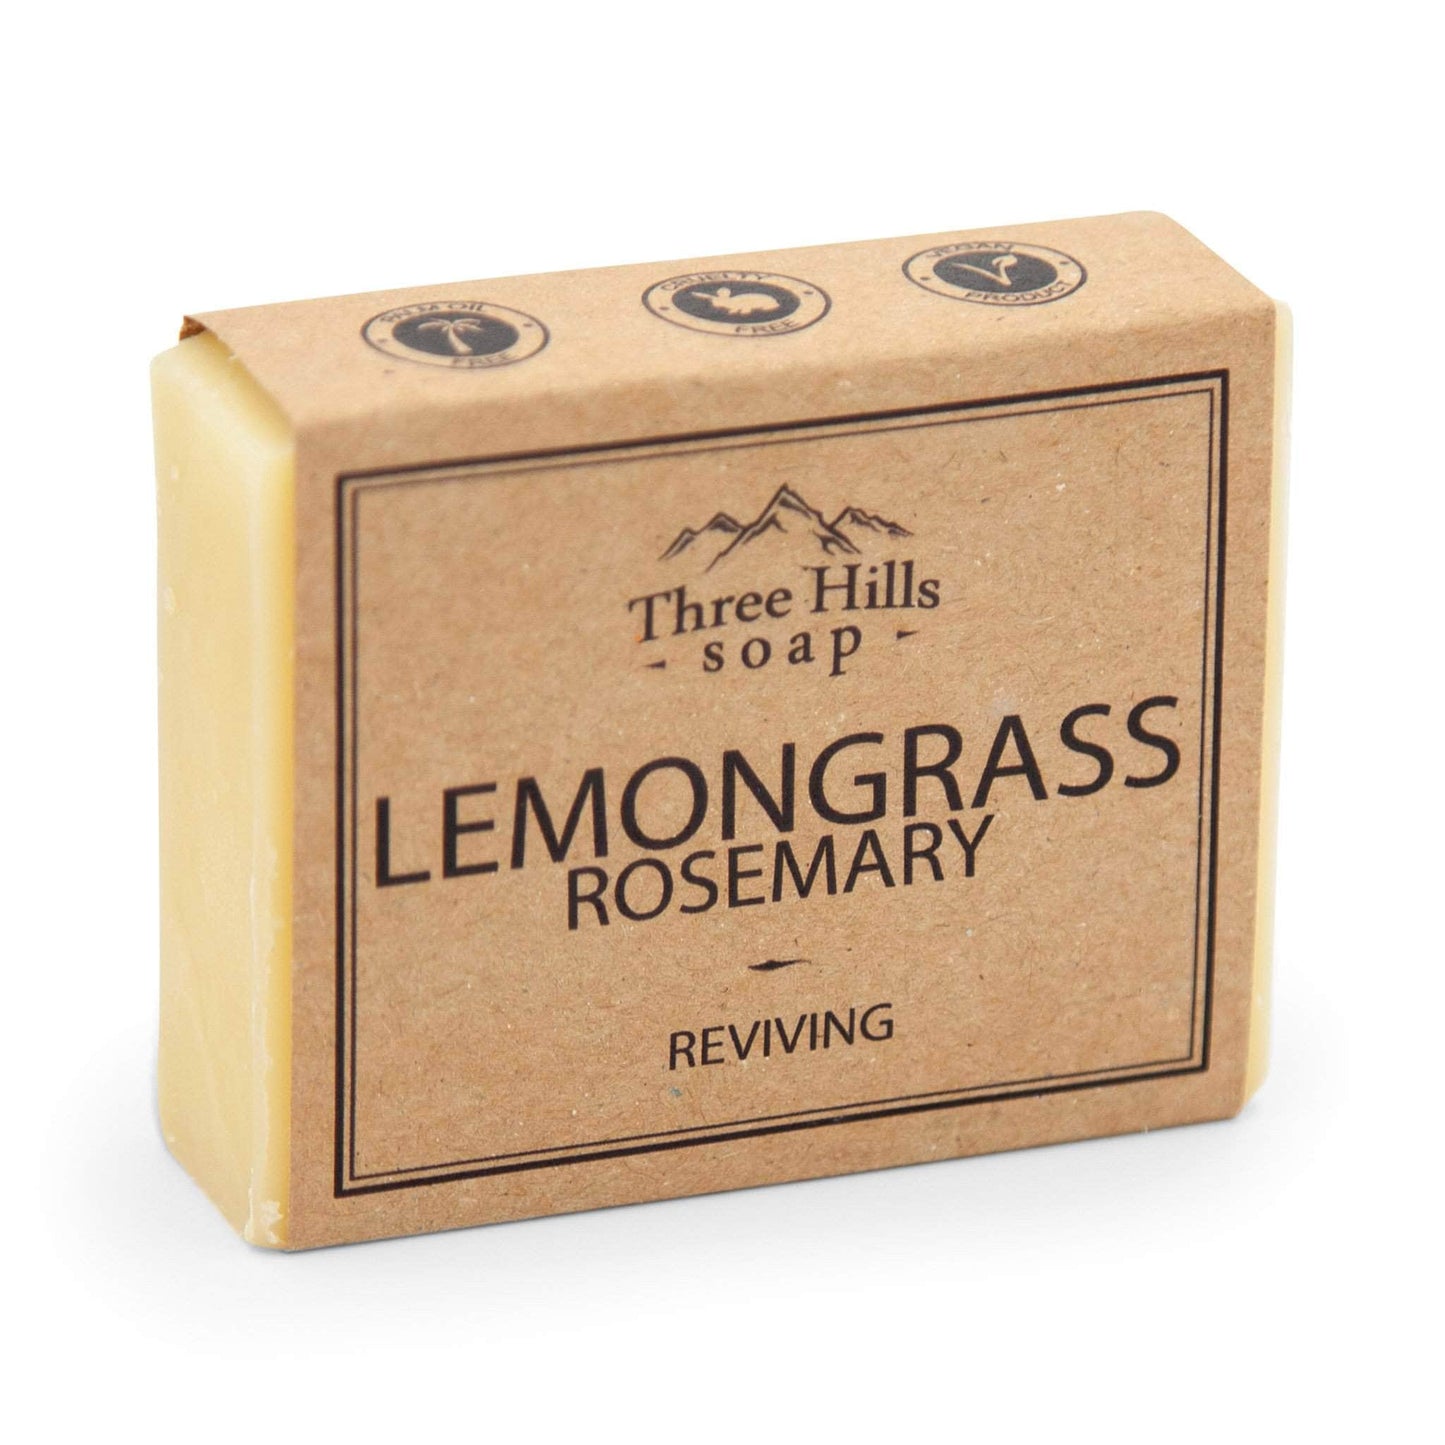 Load image into Gallery viewer, Three Hill Soaps Soap Three Hills Lemongrass Rosemary Soap
